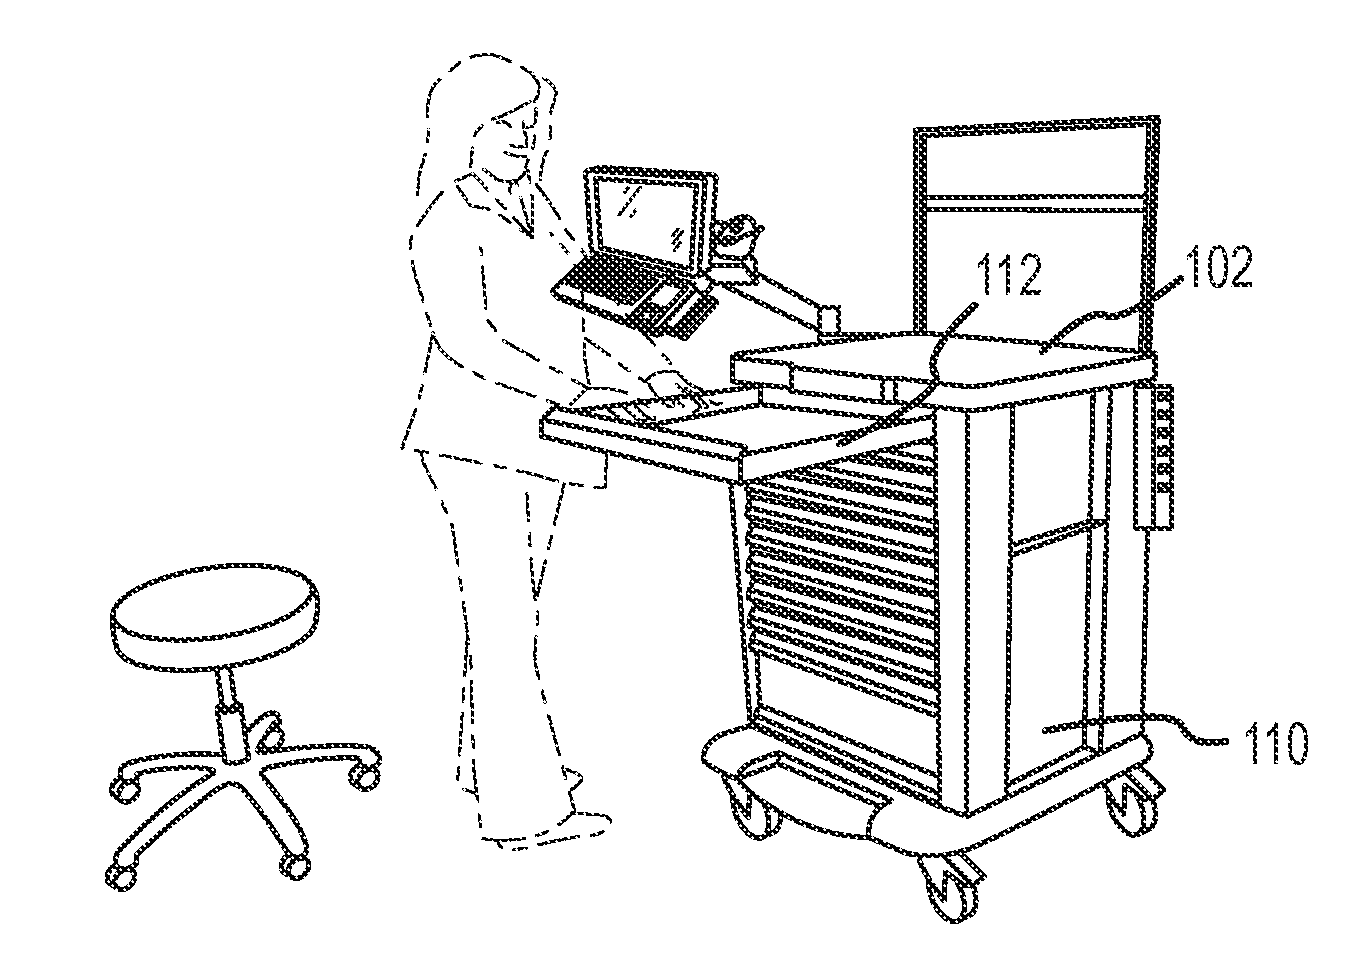 Dispensing cabinet with articulating arm